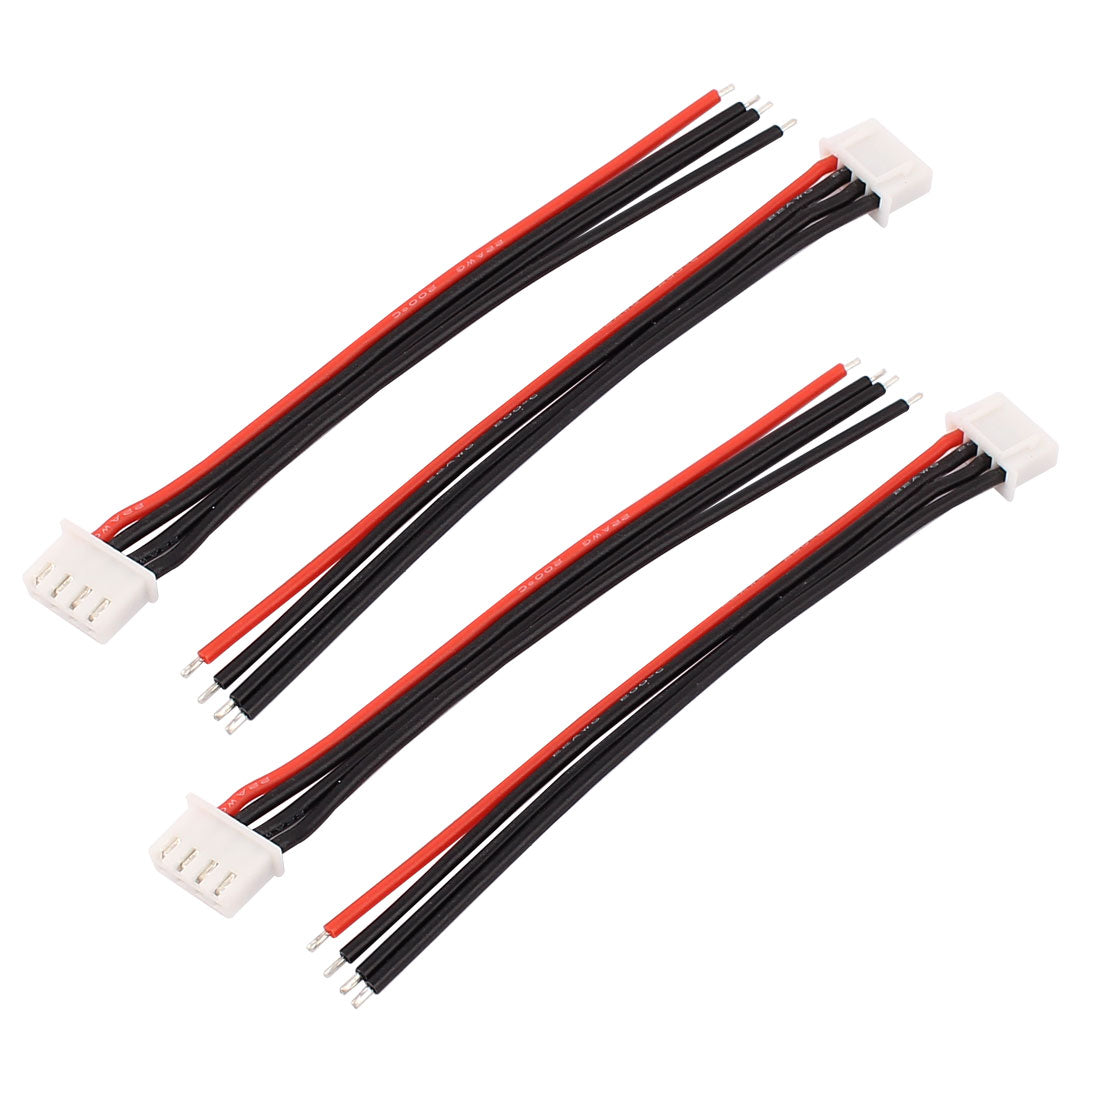 uxcell Uxcell 4Pcs 3V 3S LiPo Battery Balance Charger Cable Lead Wire Connector 100mm